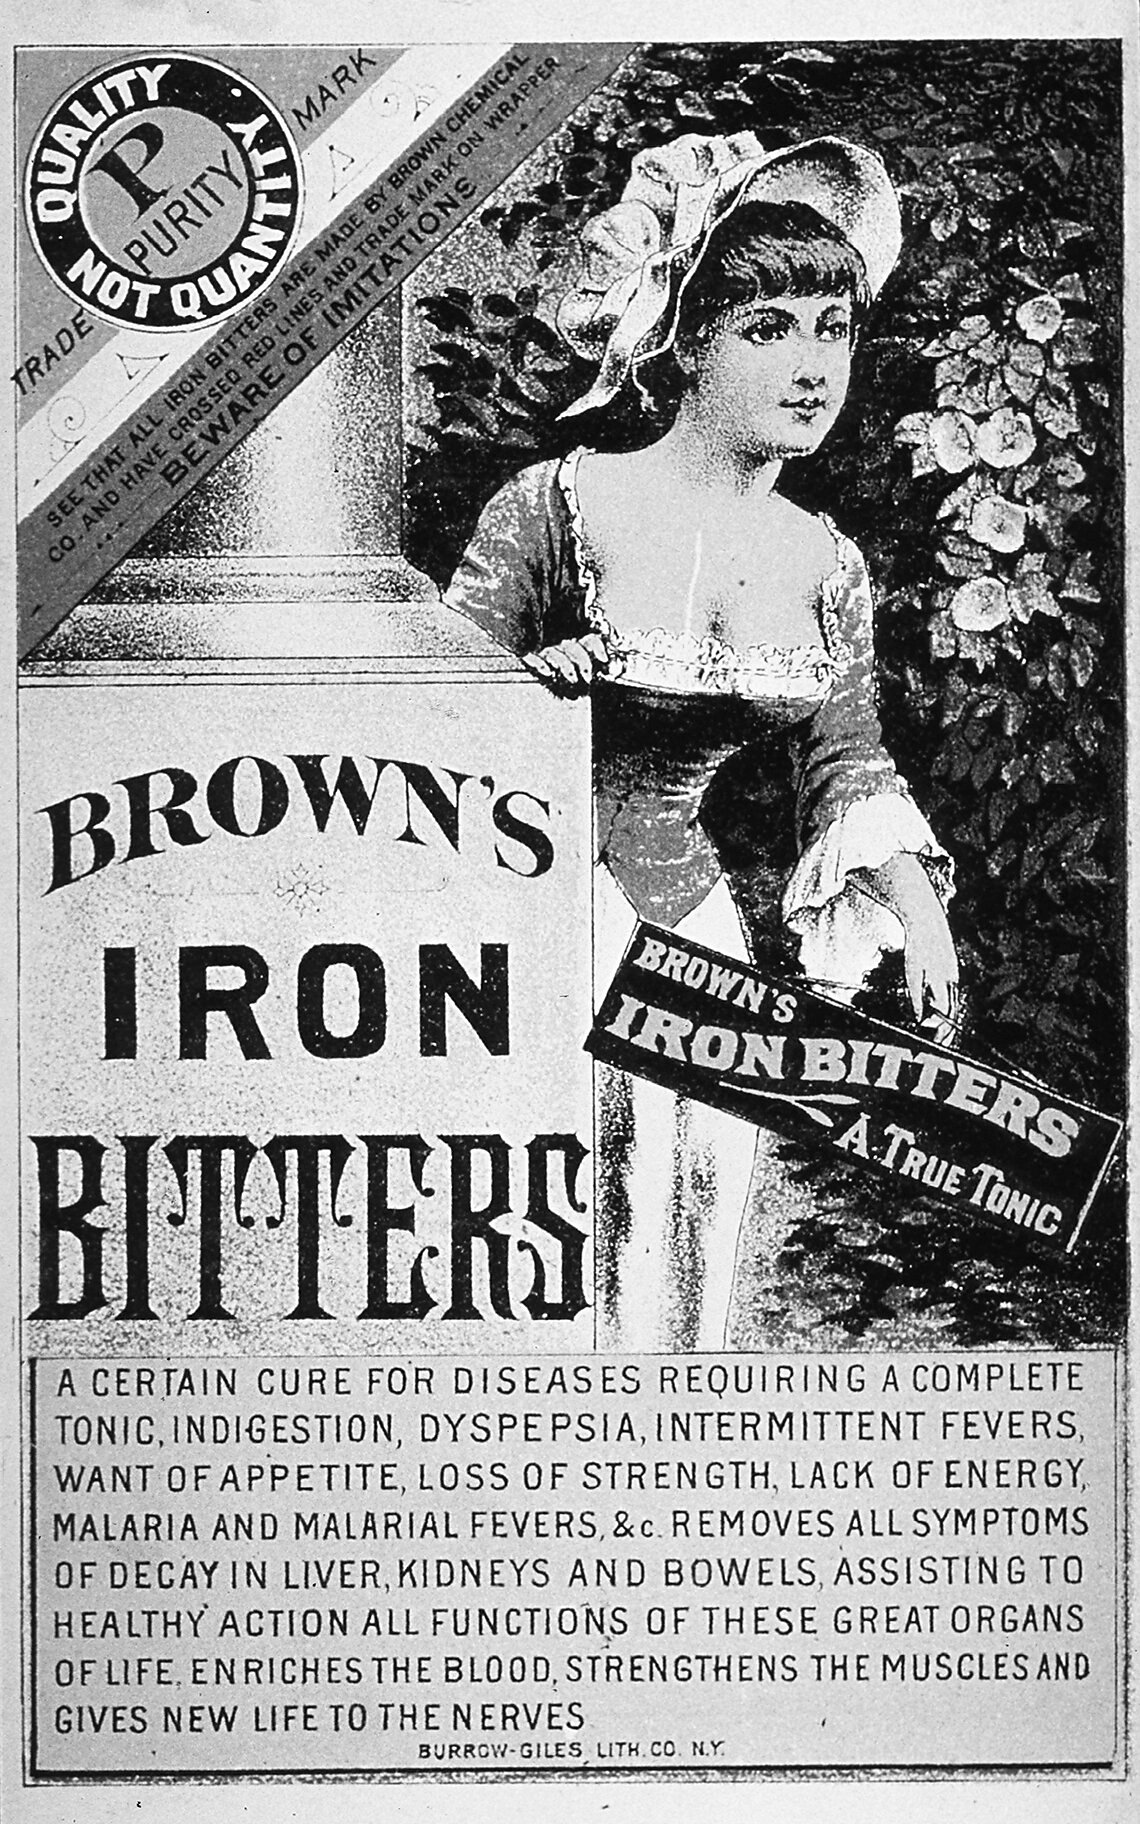 Advertisement for Brown's Iron Bitters, which contained cocaine, featuring a young woman emerging from behind a pillar on which is written "Brown's Iron Bitters."